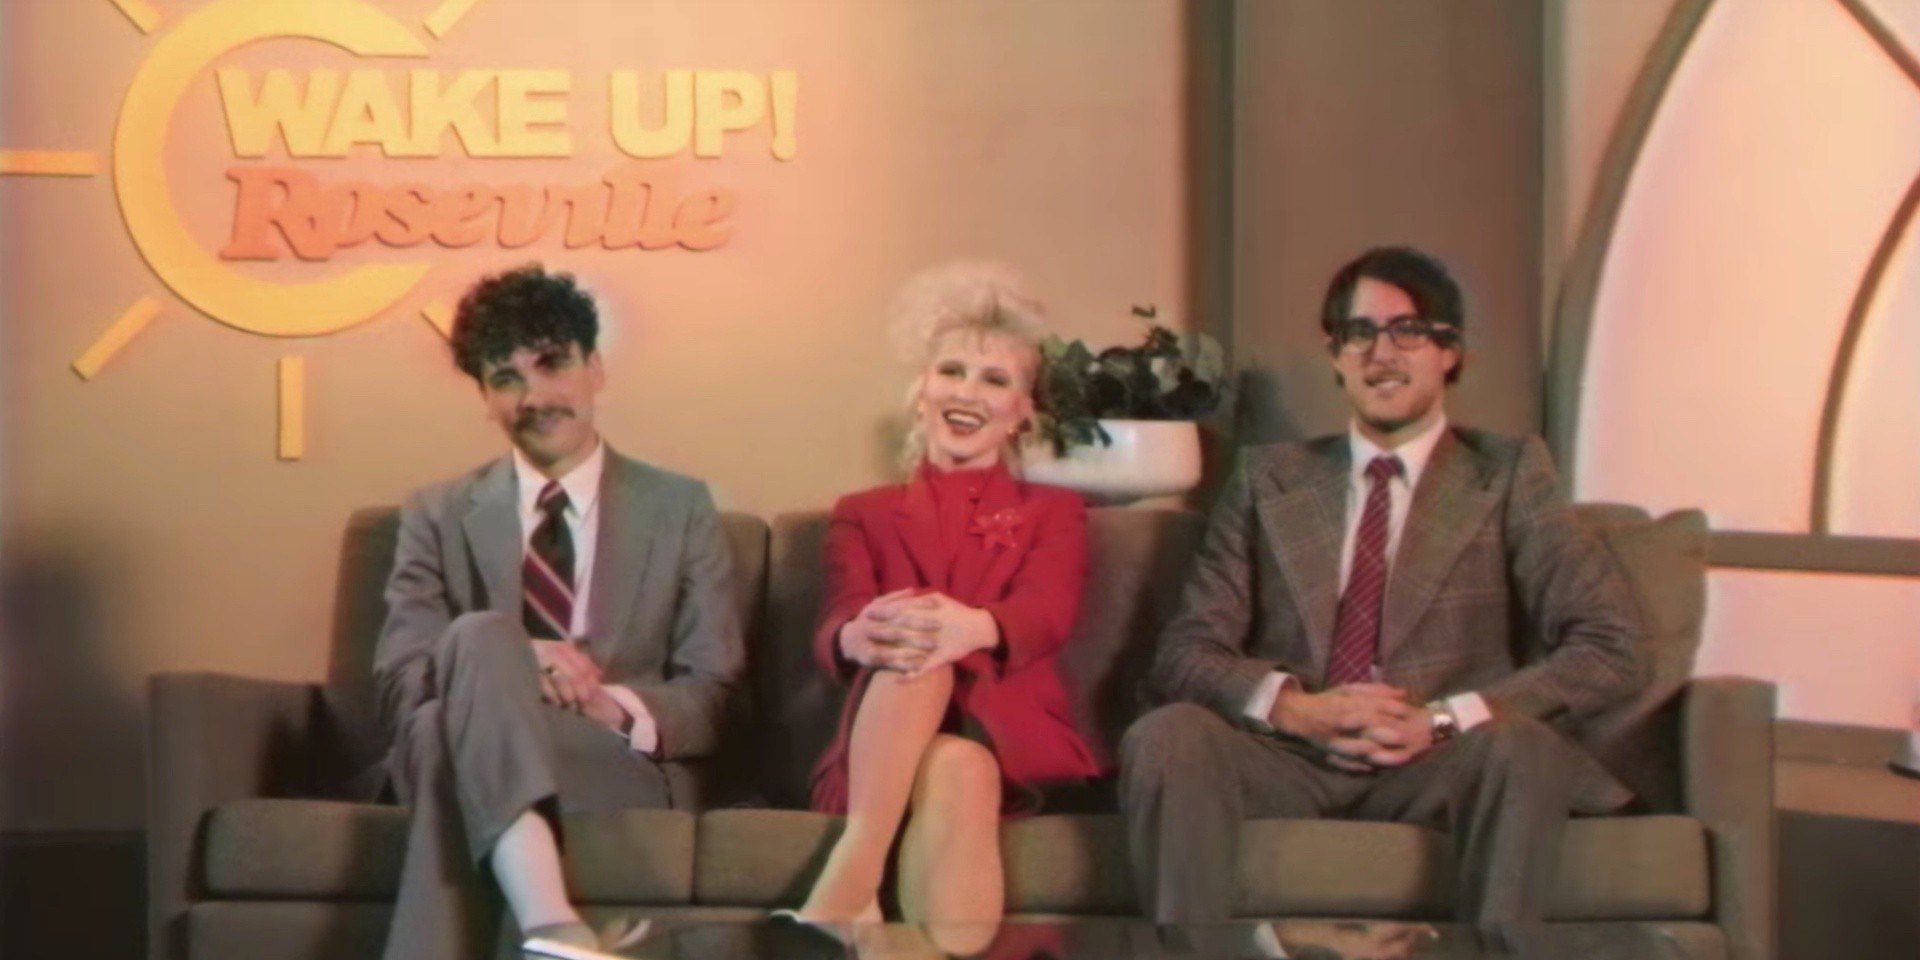 Paramore are television show hosts on the brink of losing it in the 'Rose-Colored Boy' video – watch